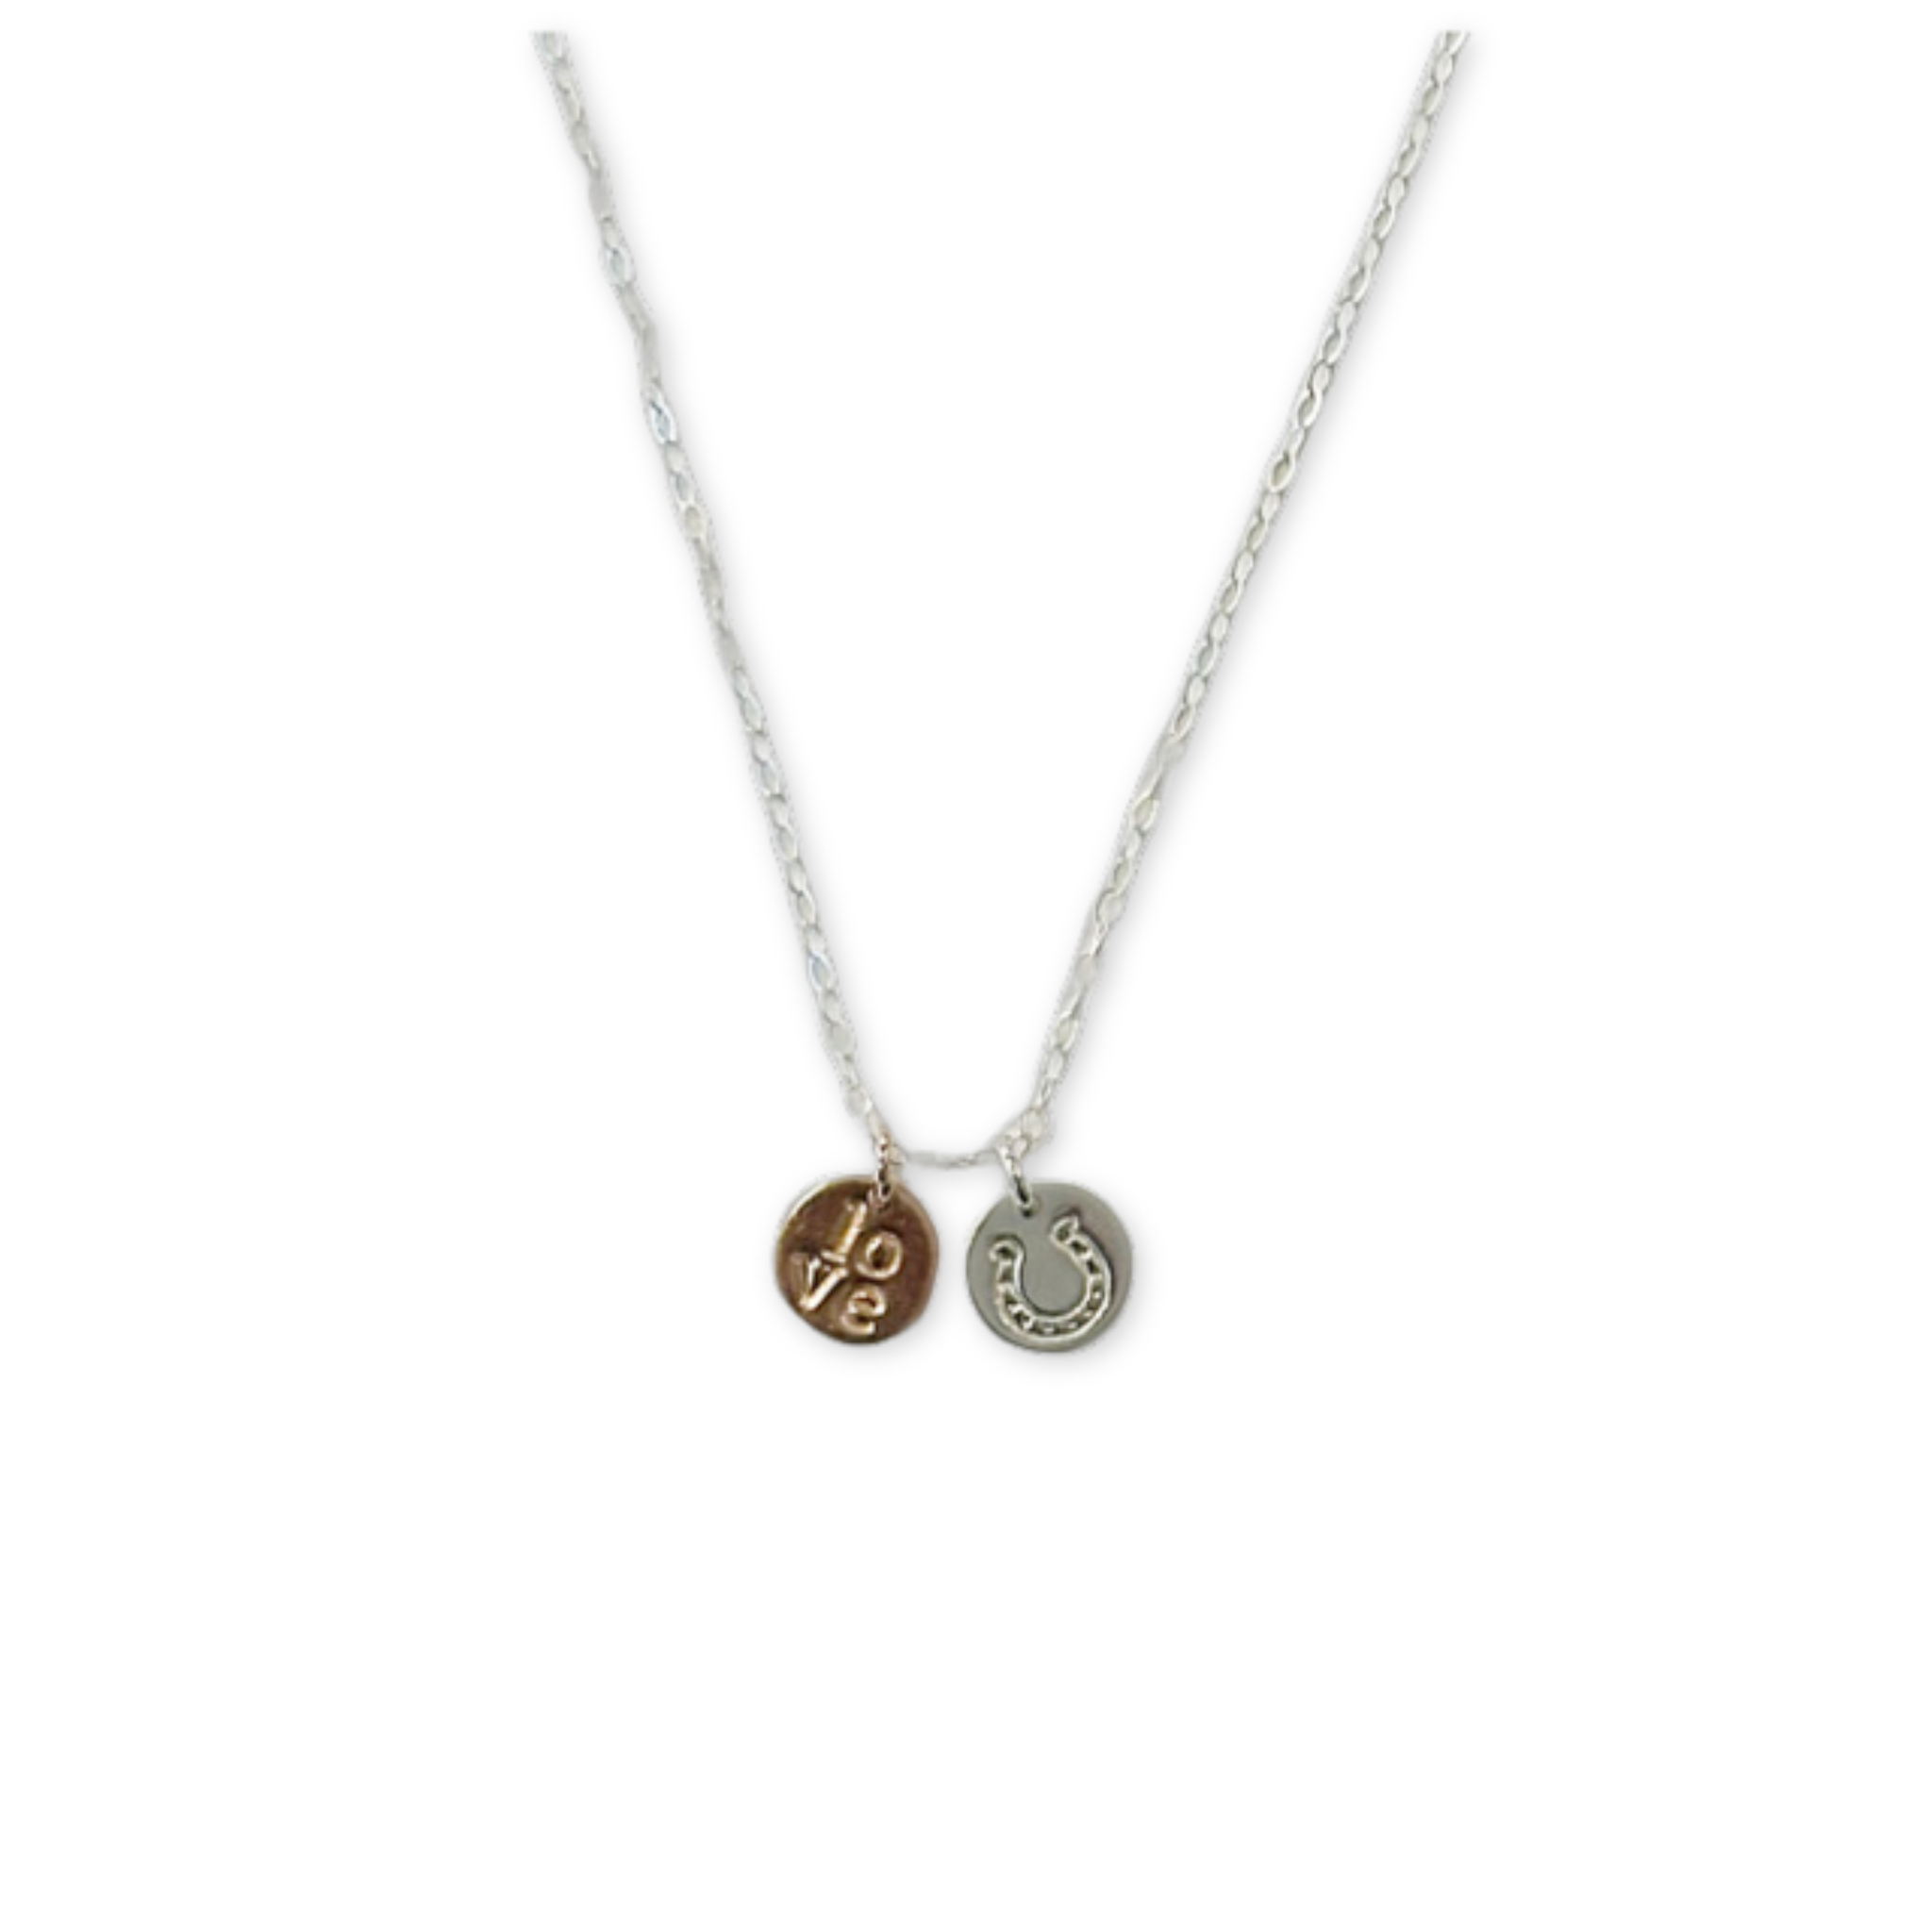 necklace with two stamped charms with the word love and a horseshoe